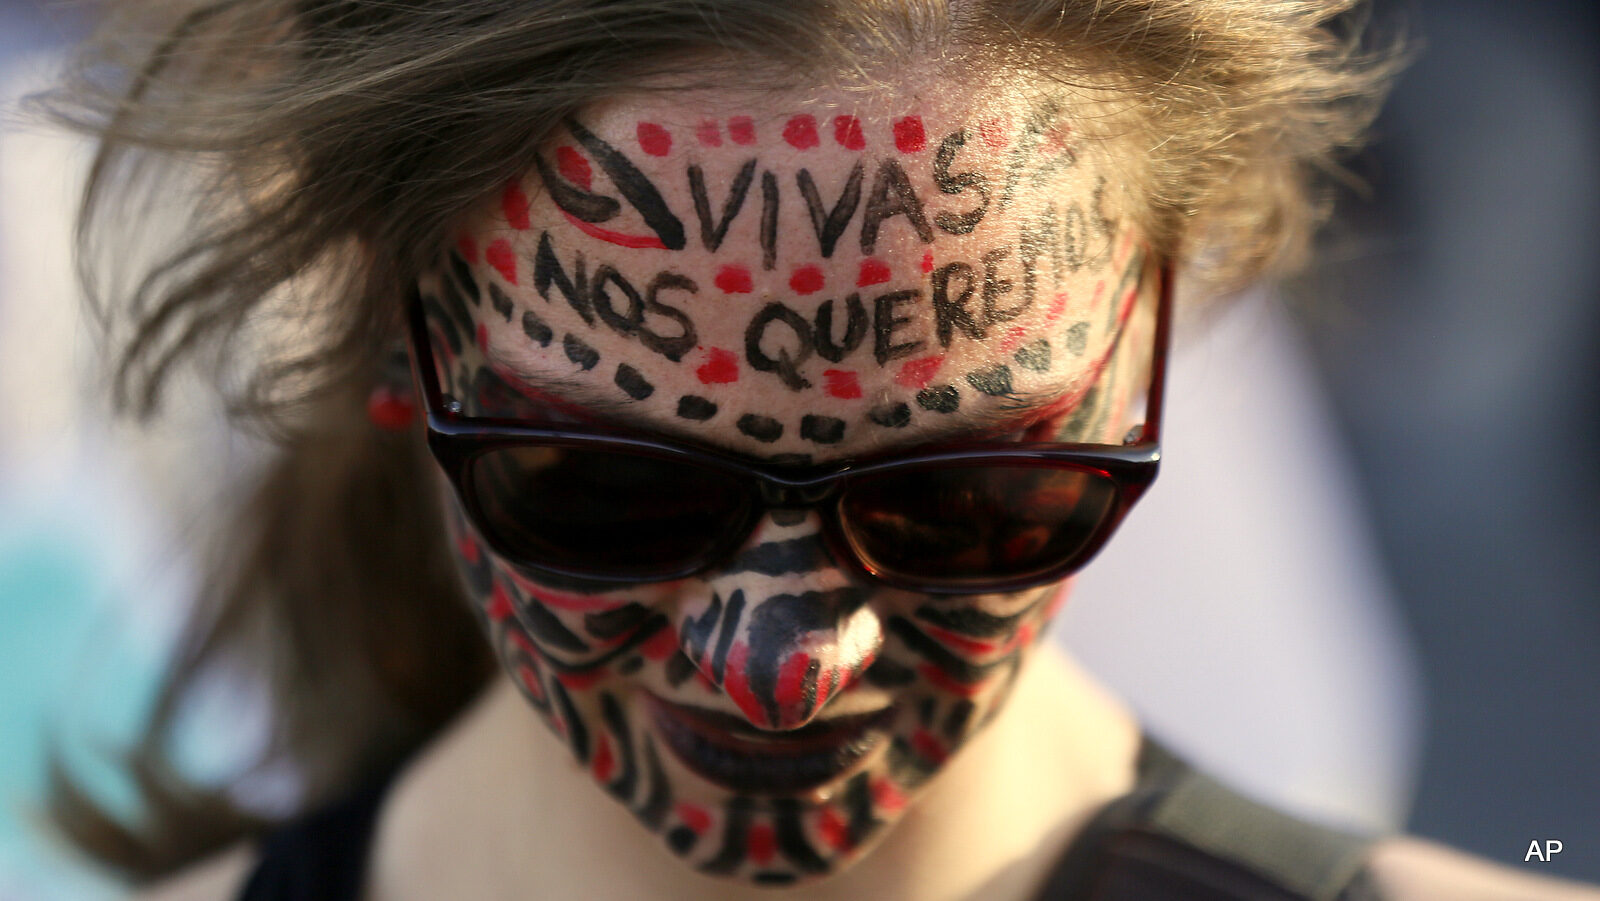 A woman with her face painted protests against gender violence in Mexico City, Wednesday, Oct. 19, 2016. Women across Latin America participated in protests in response to the shocking rape and killing of a teenage girl on Oct. 8 in Argentina.